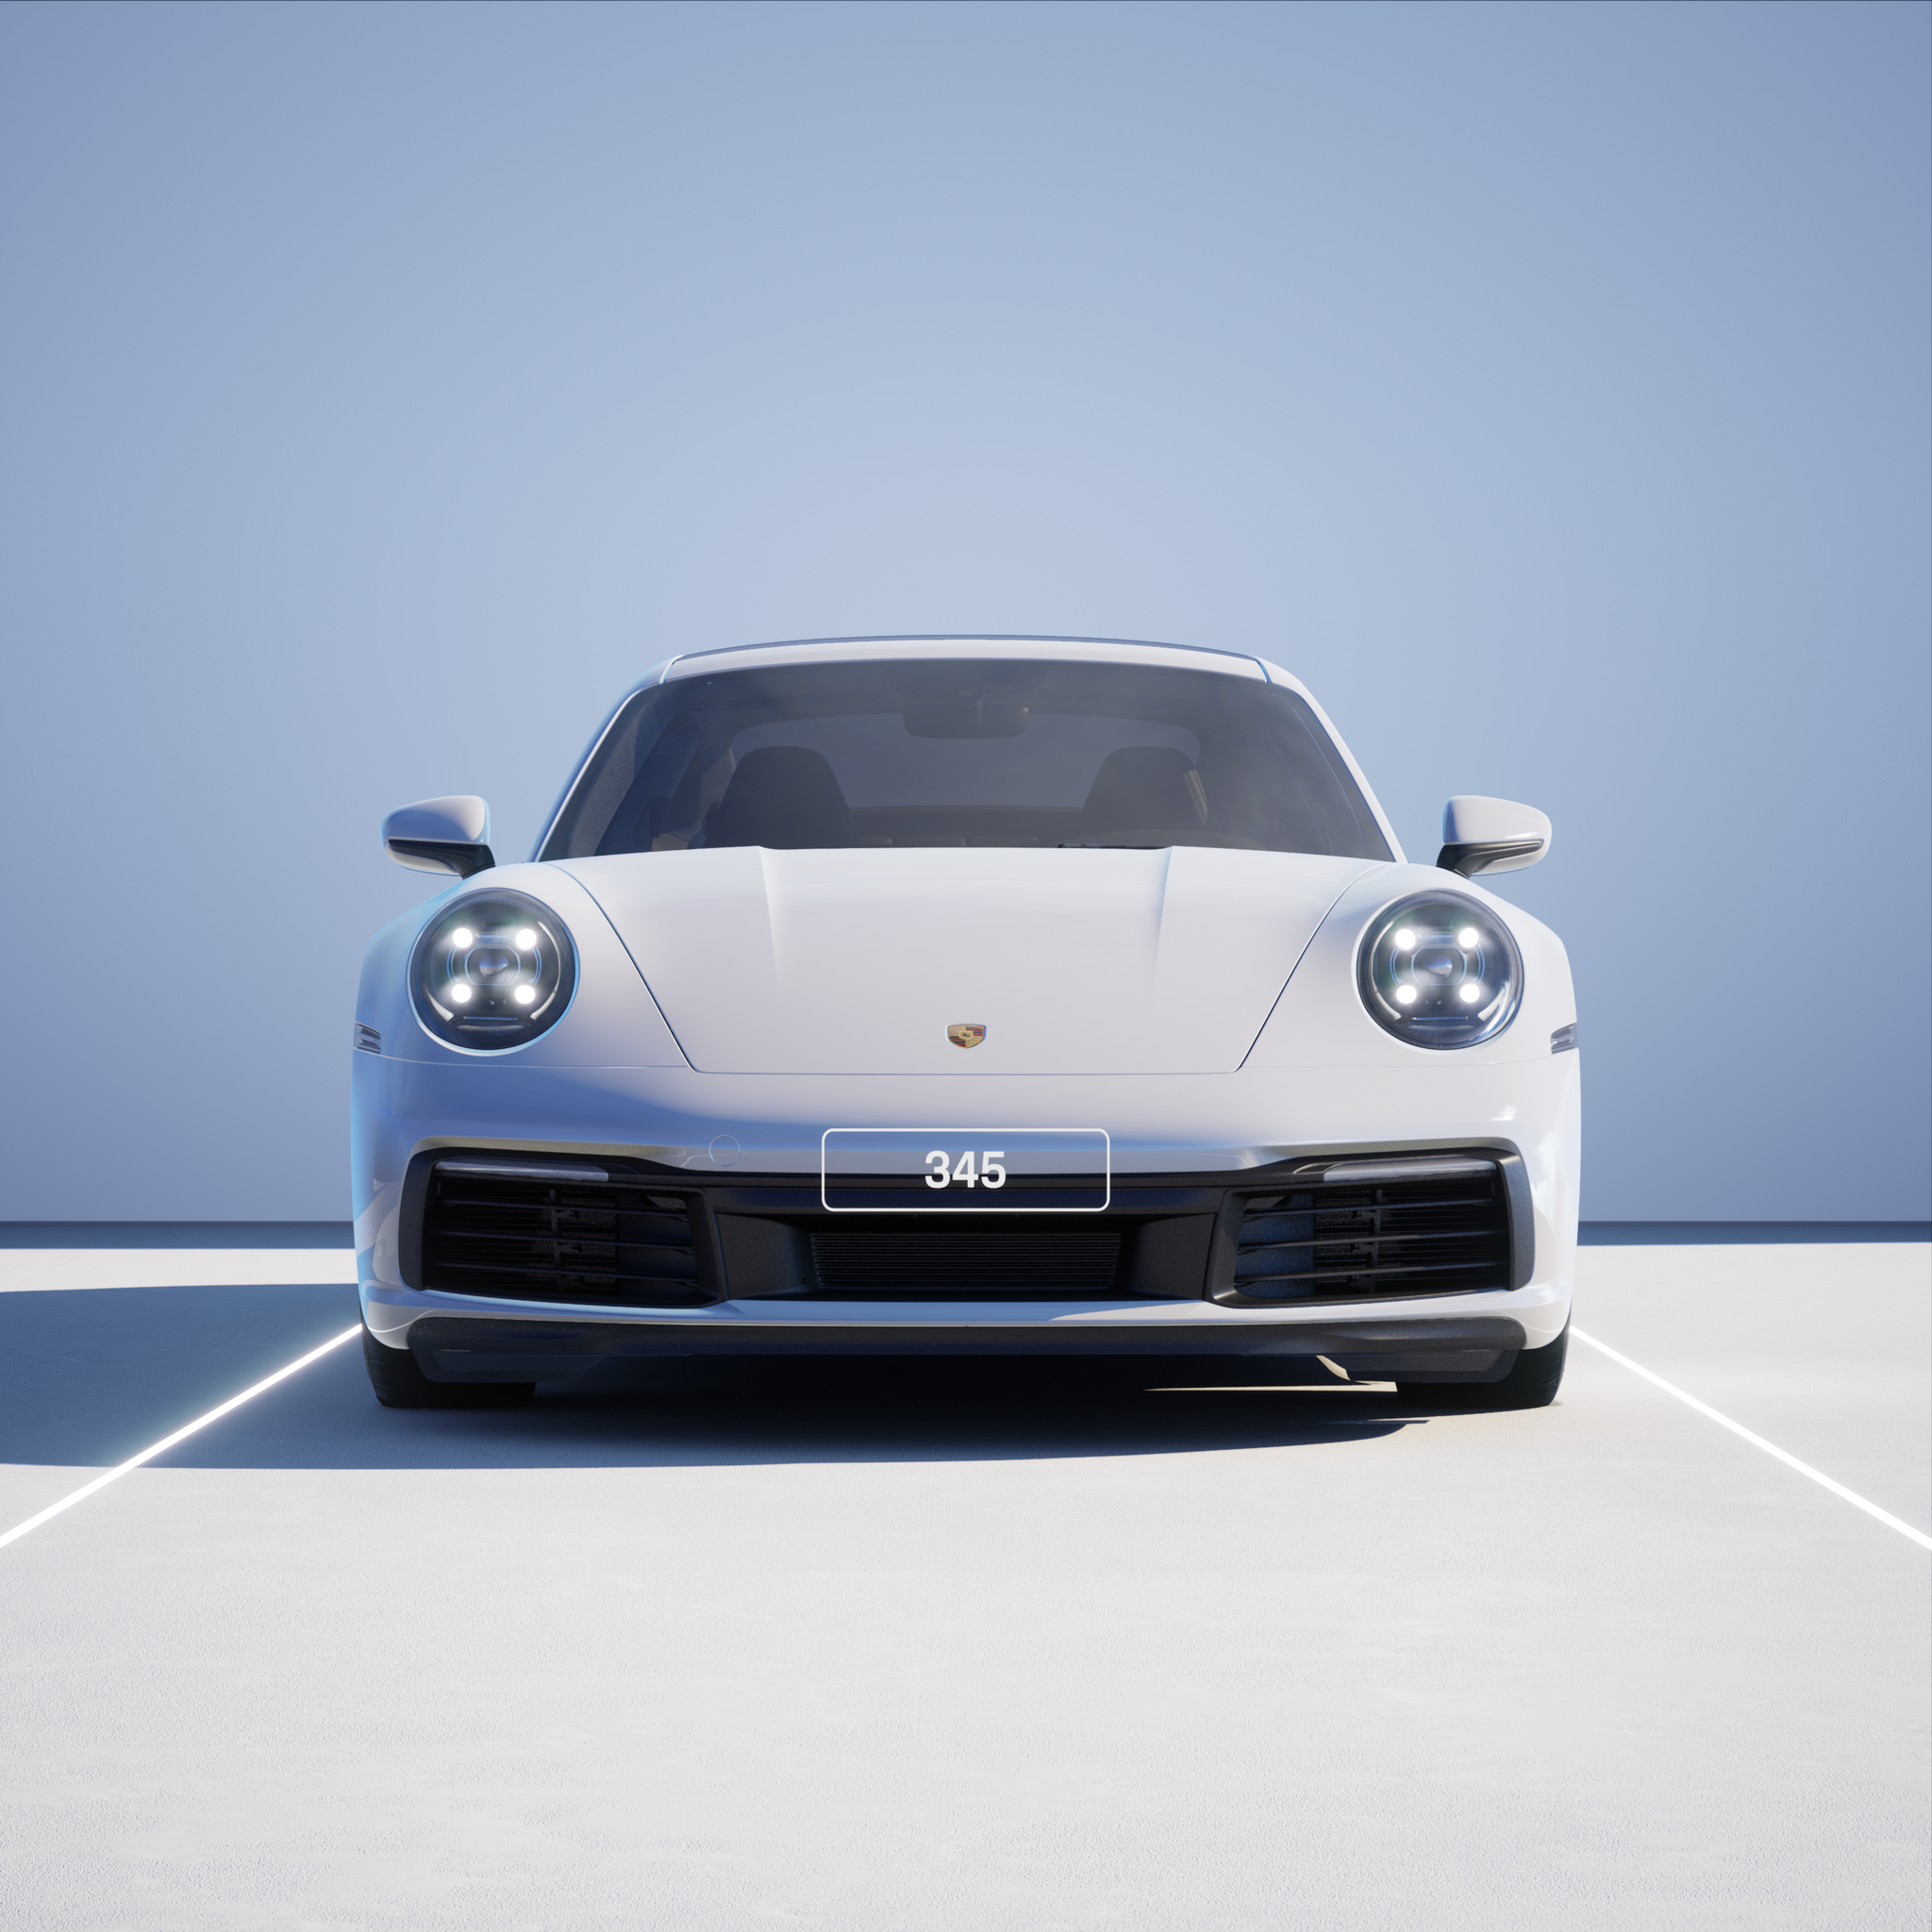 The PORSCHΞ 911 345 image in phase